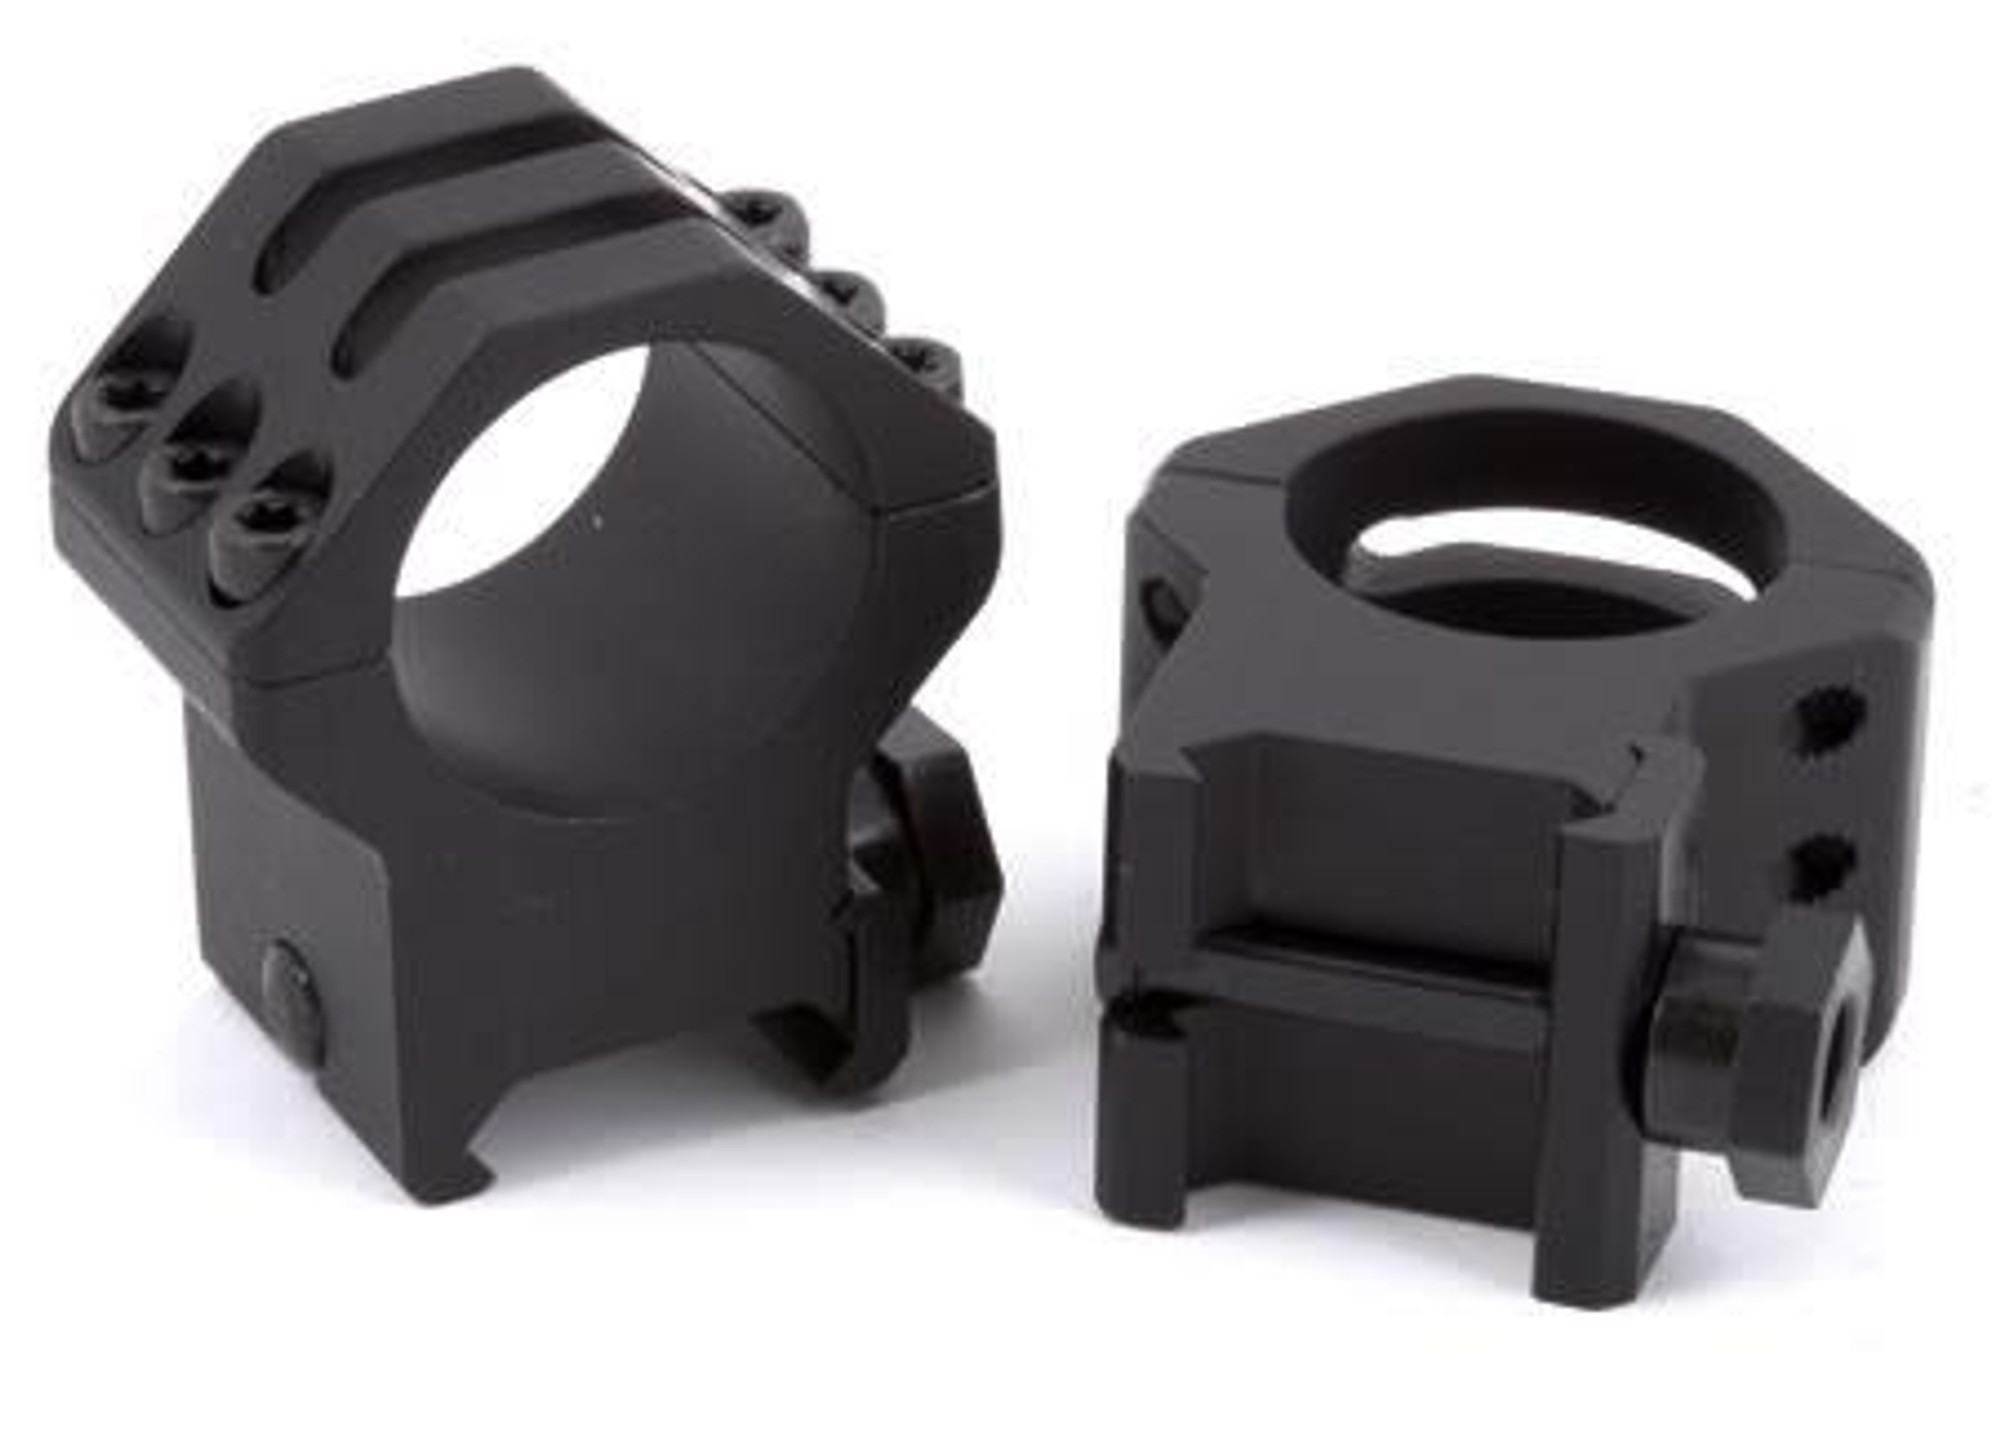 Tactical Rings Six Hole X-tra High Matte